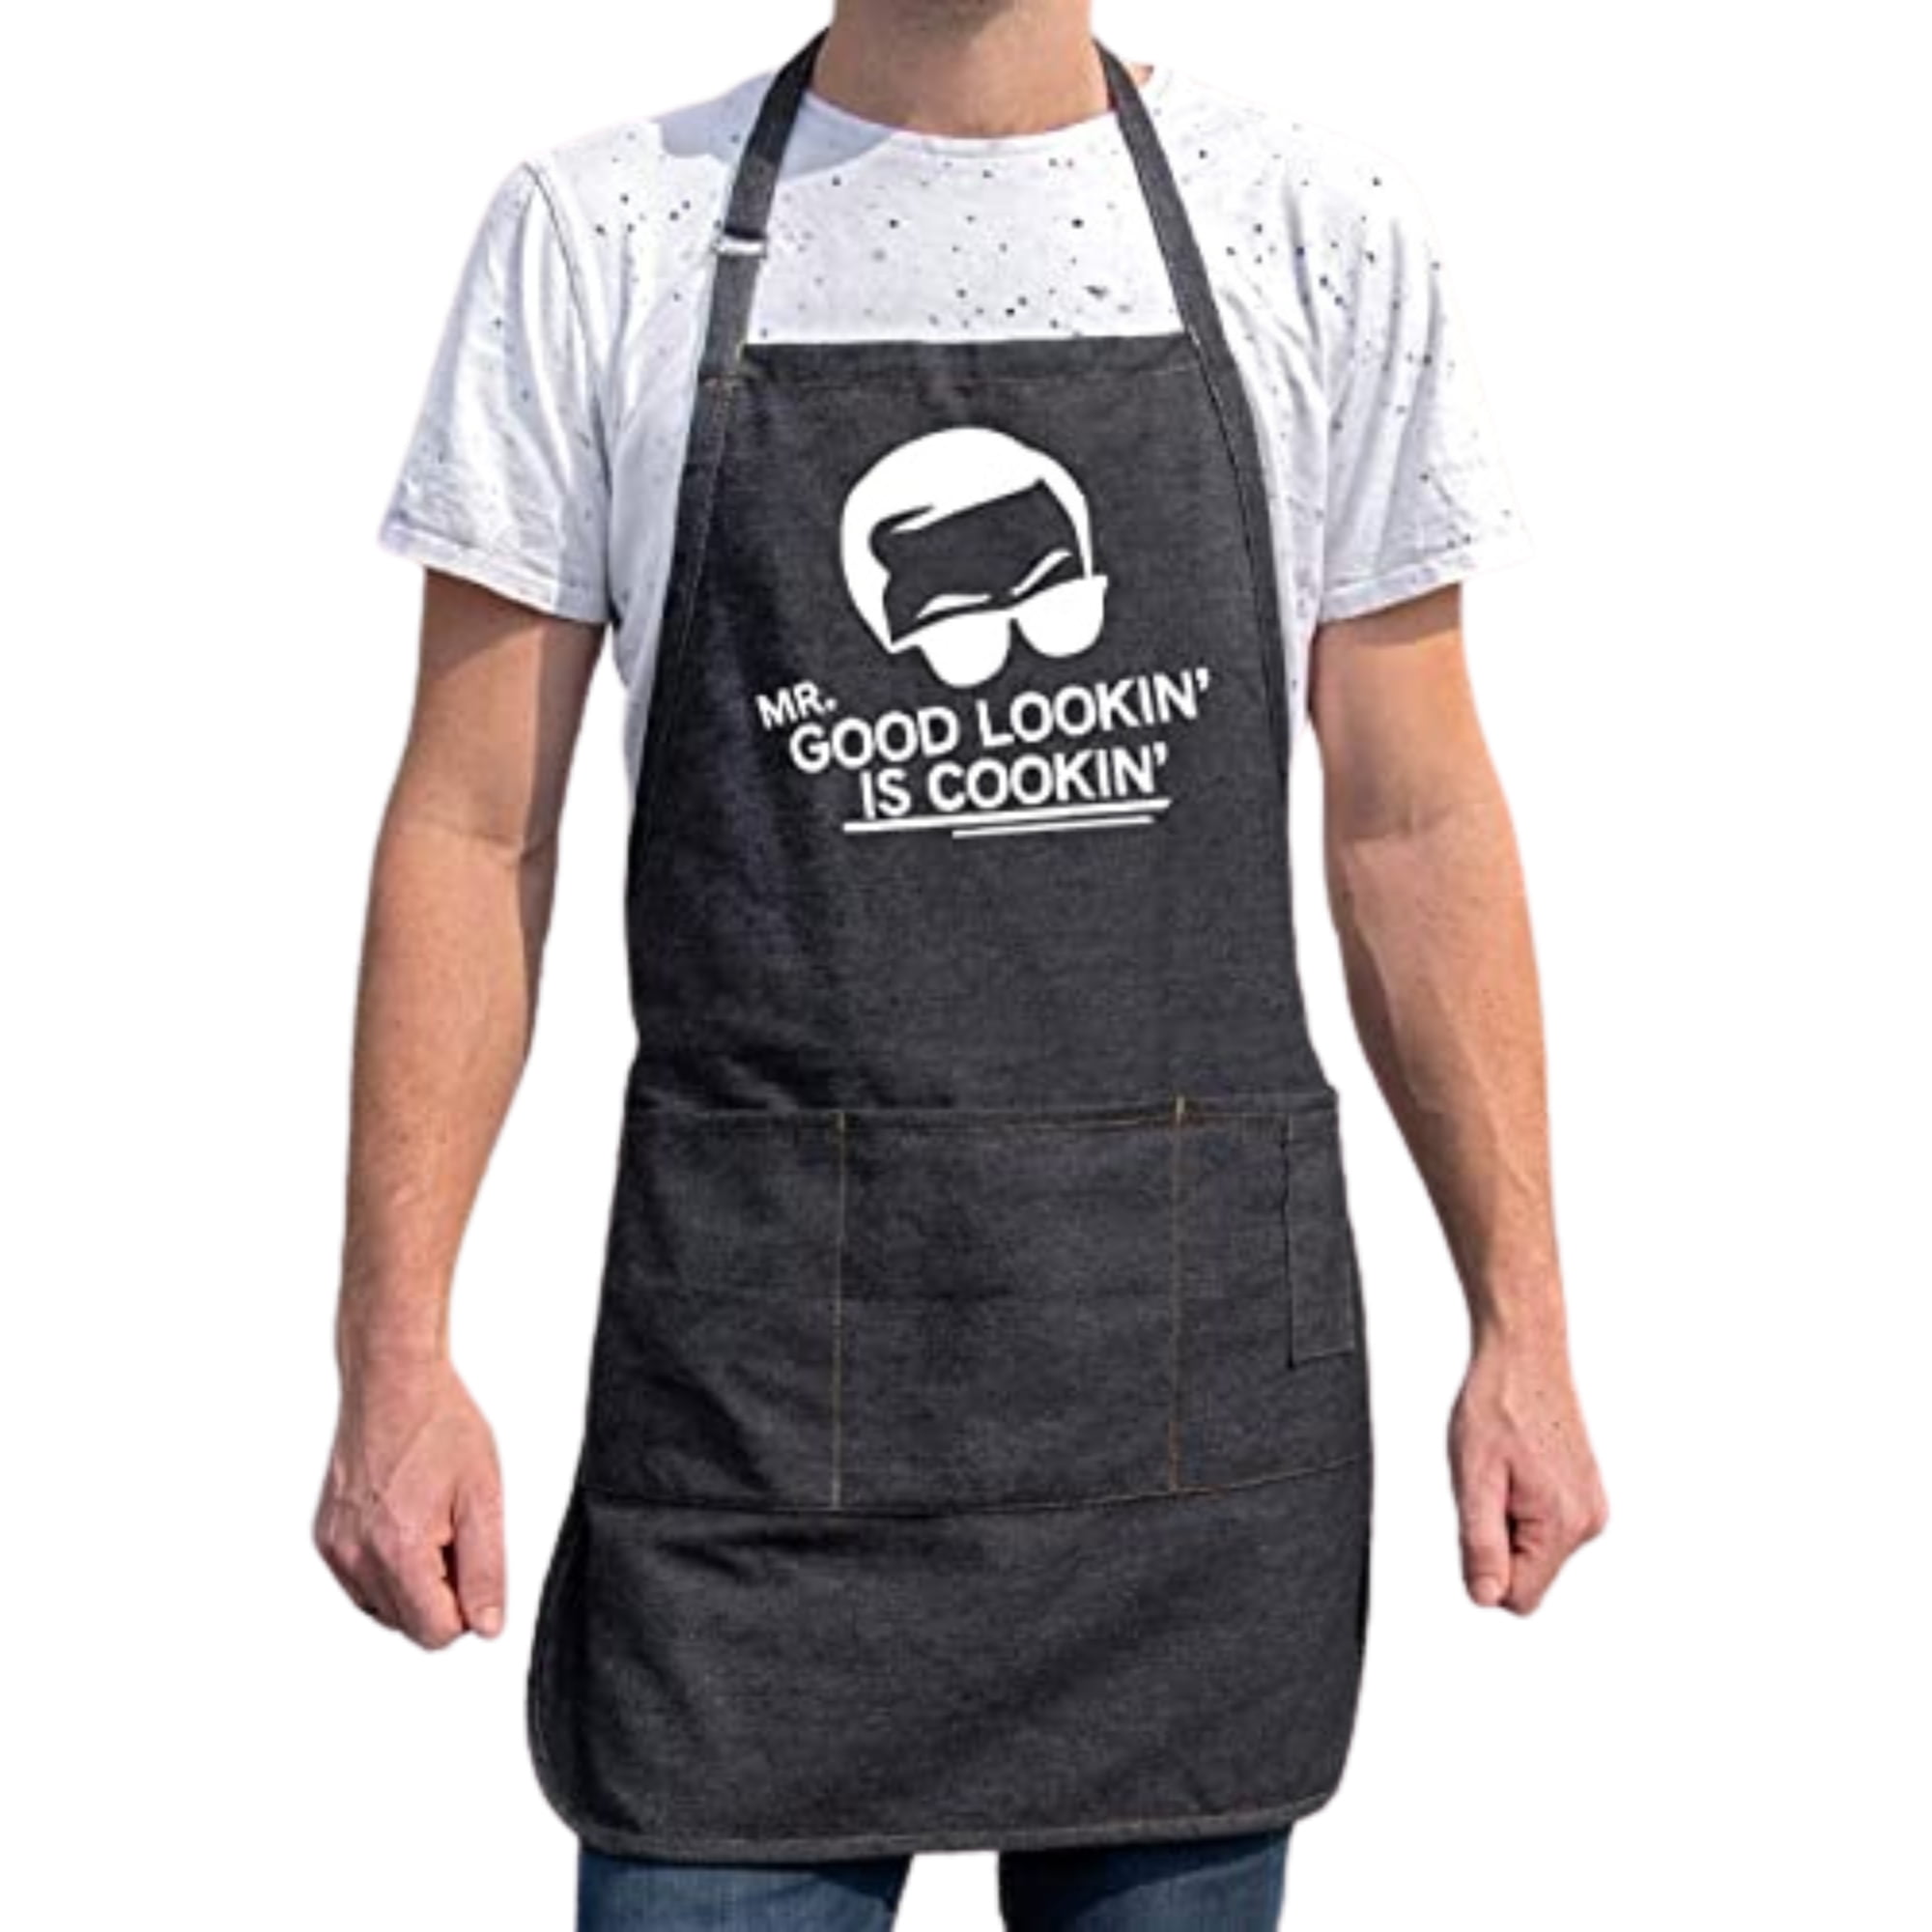 ApronMen, Funny Aprons For Men - Mr. Good Looking Is Cooking - 100% ...